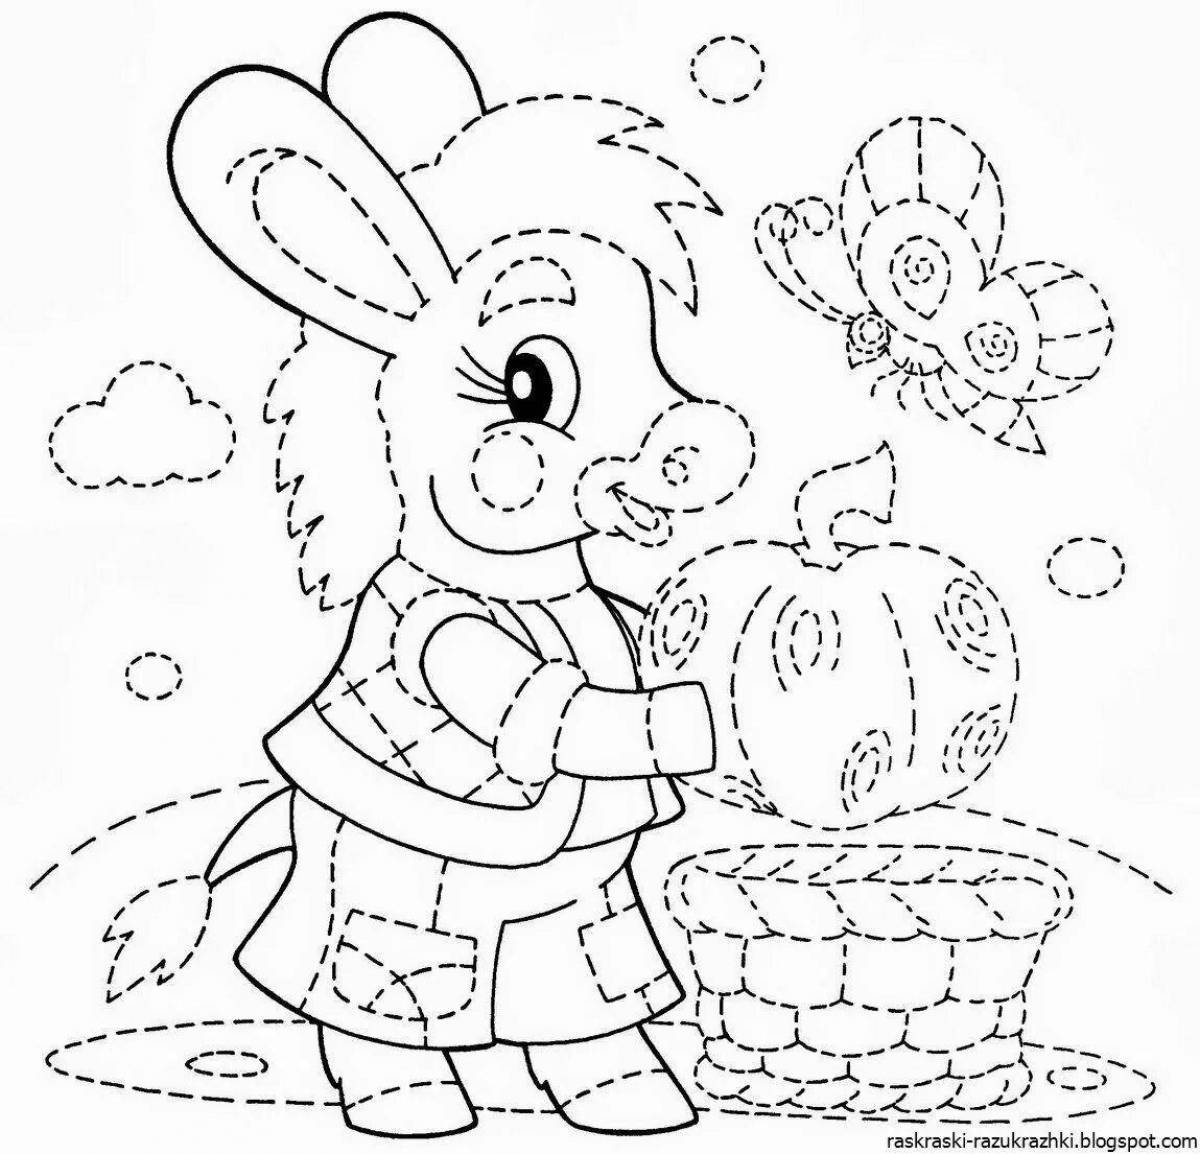 Color-frenzy coloring page for 6 year olds